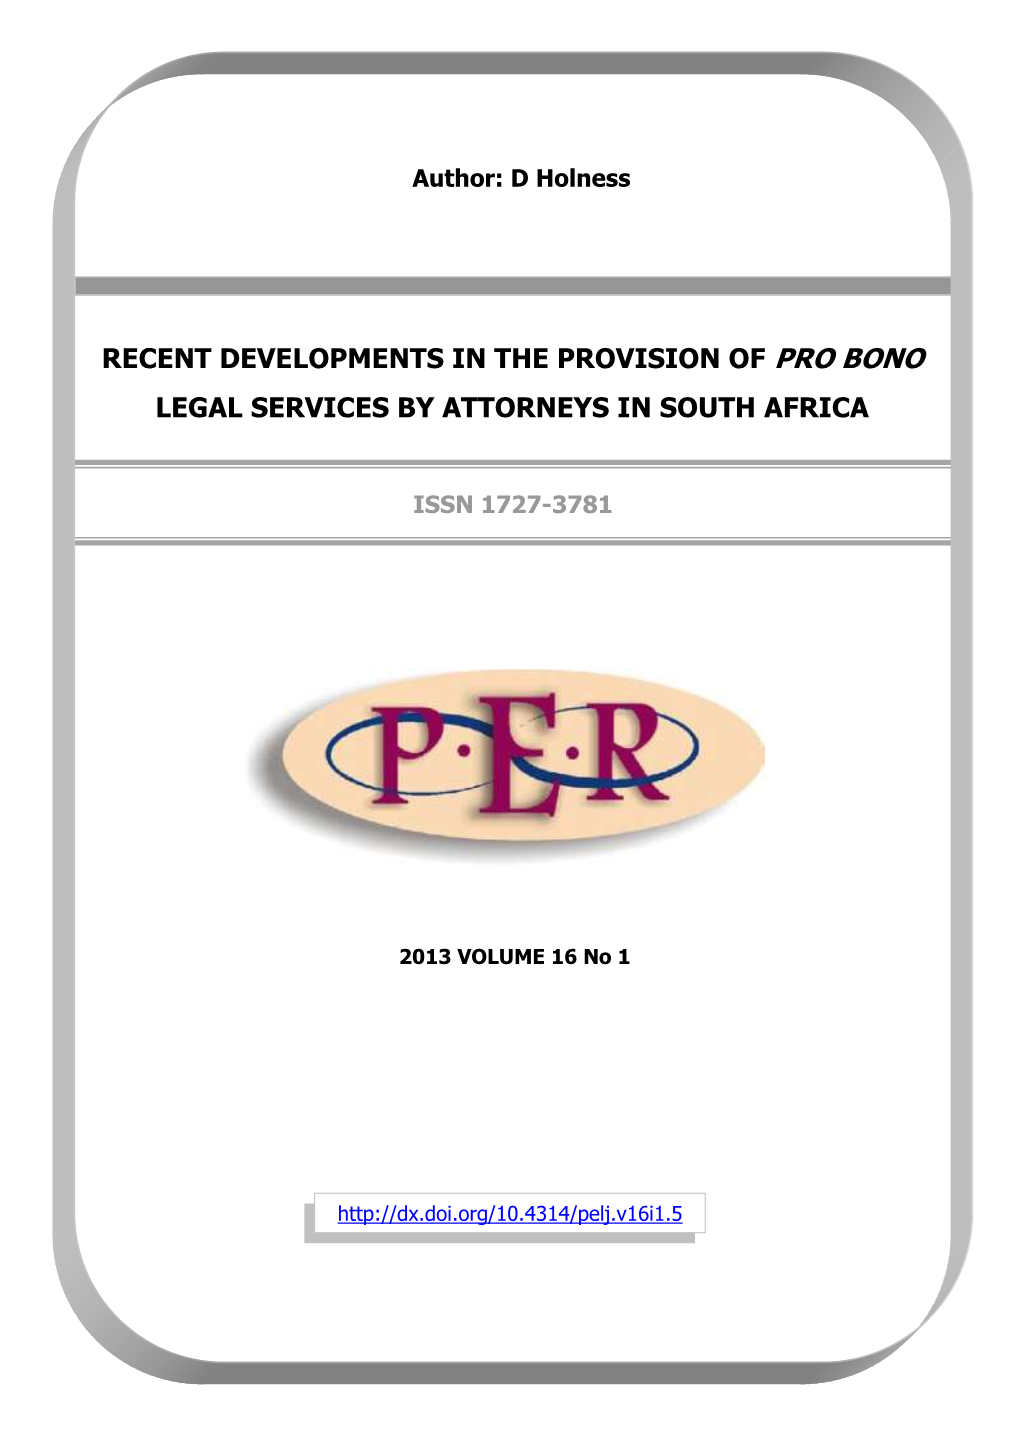 Recent Developments in the Provision of Pro Bono Legal Services by Attorneys in South Africa